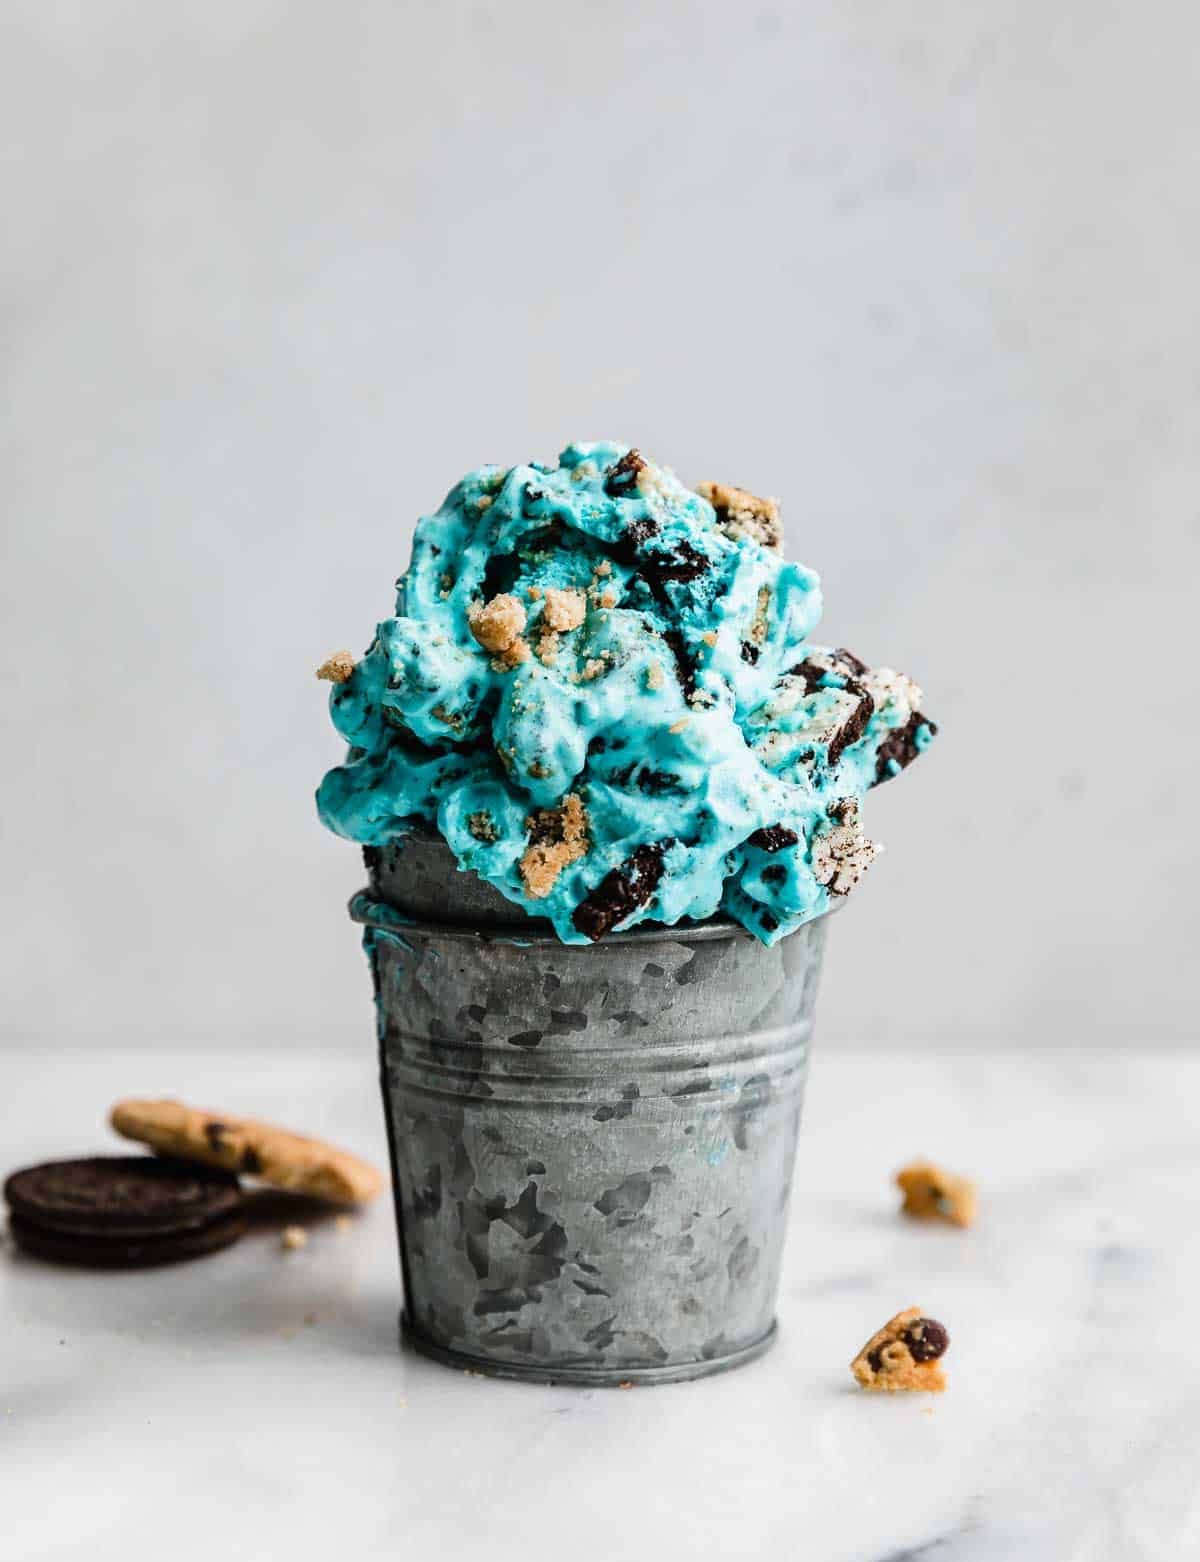 Small metal cup filled with blue Cookie Monster Ice Cream against a white background.